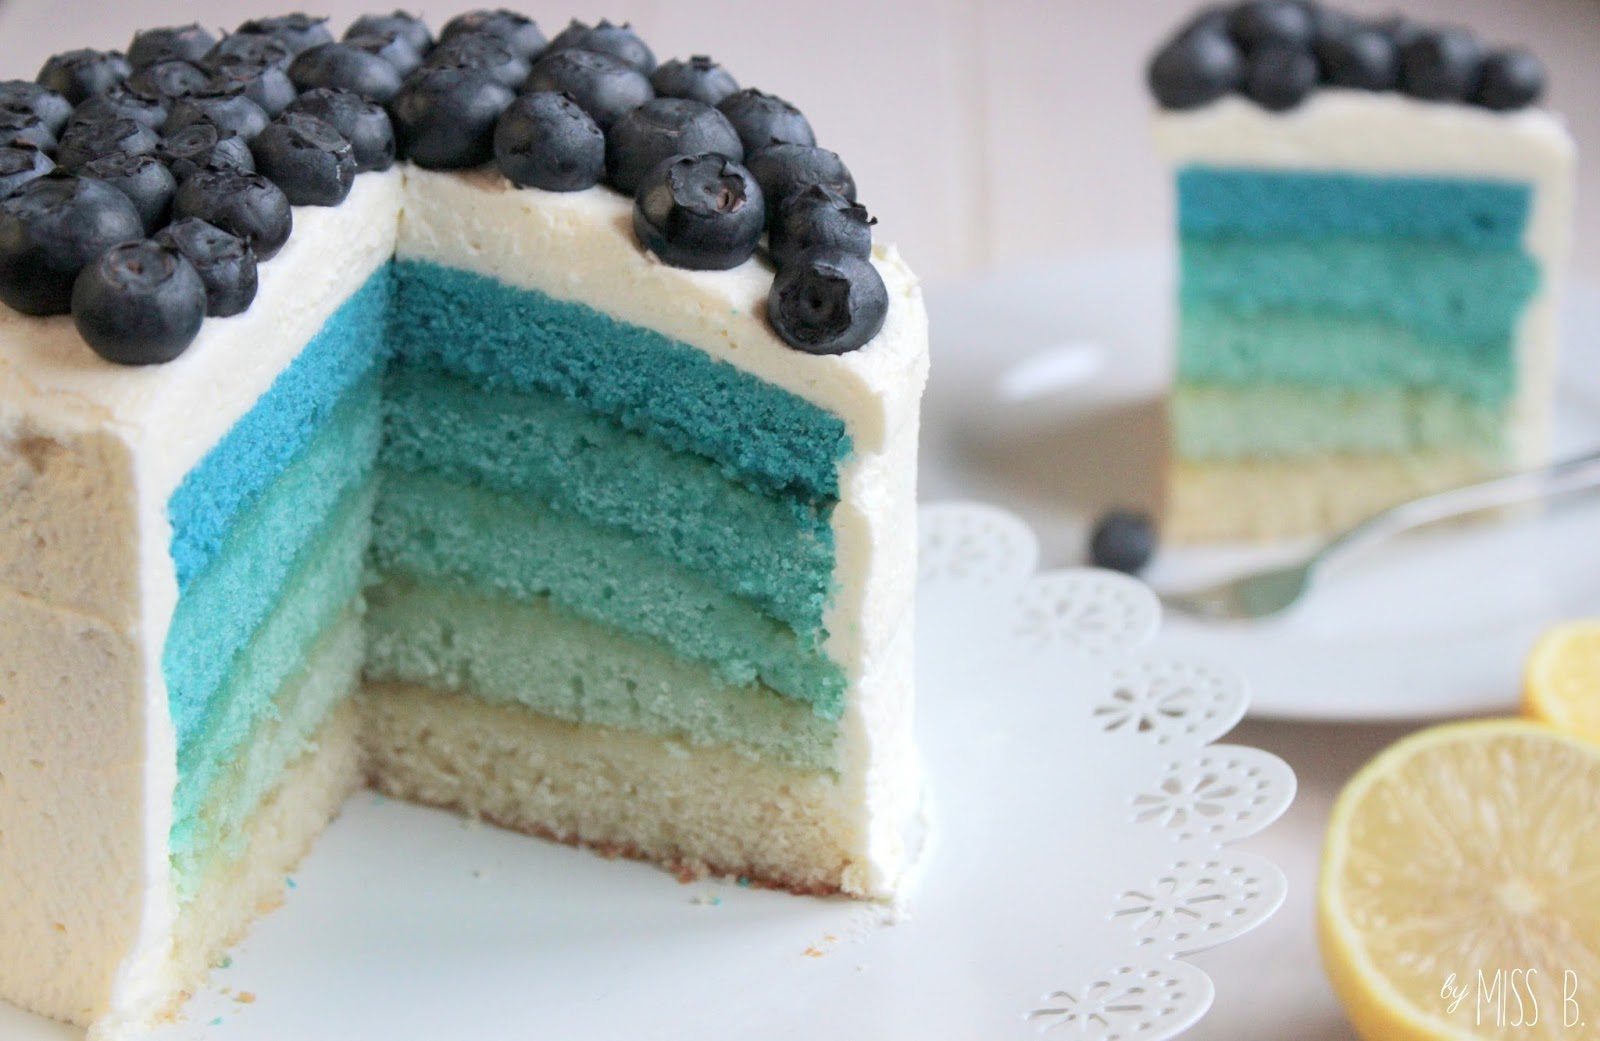 Blue obre cake with blueberries